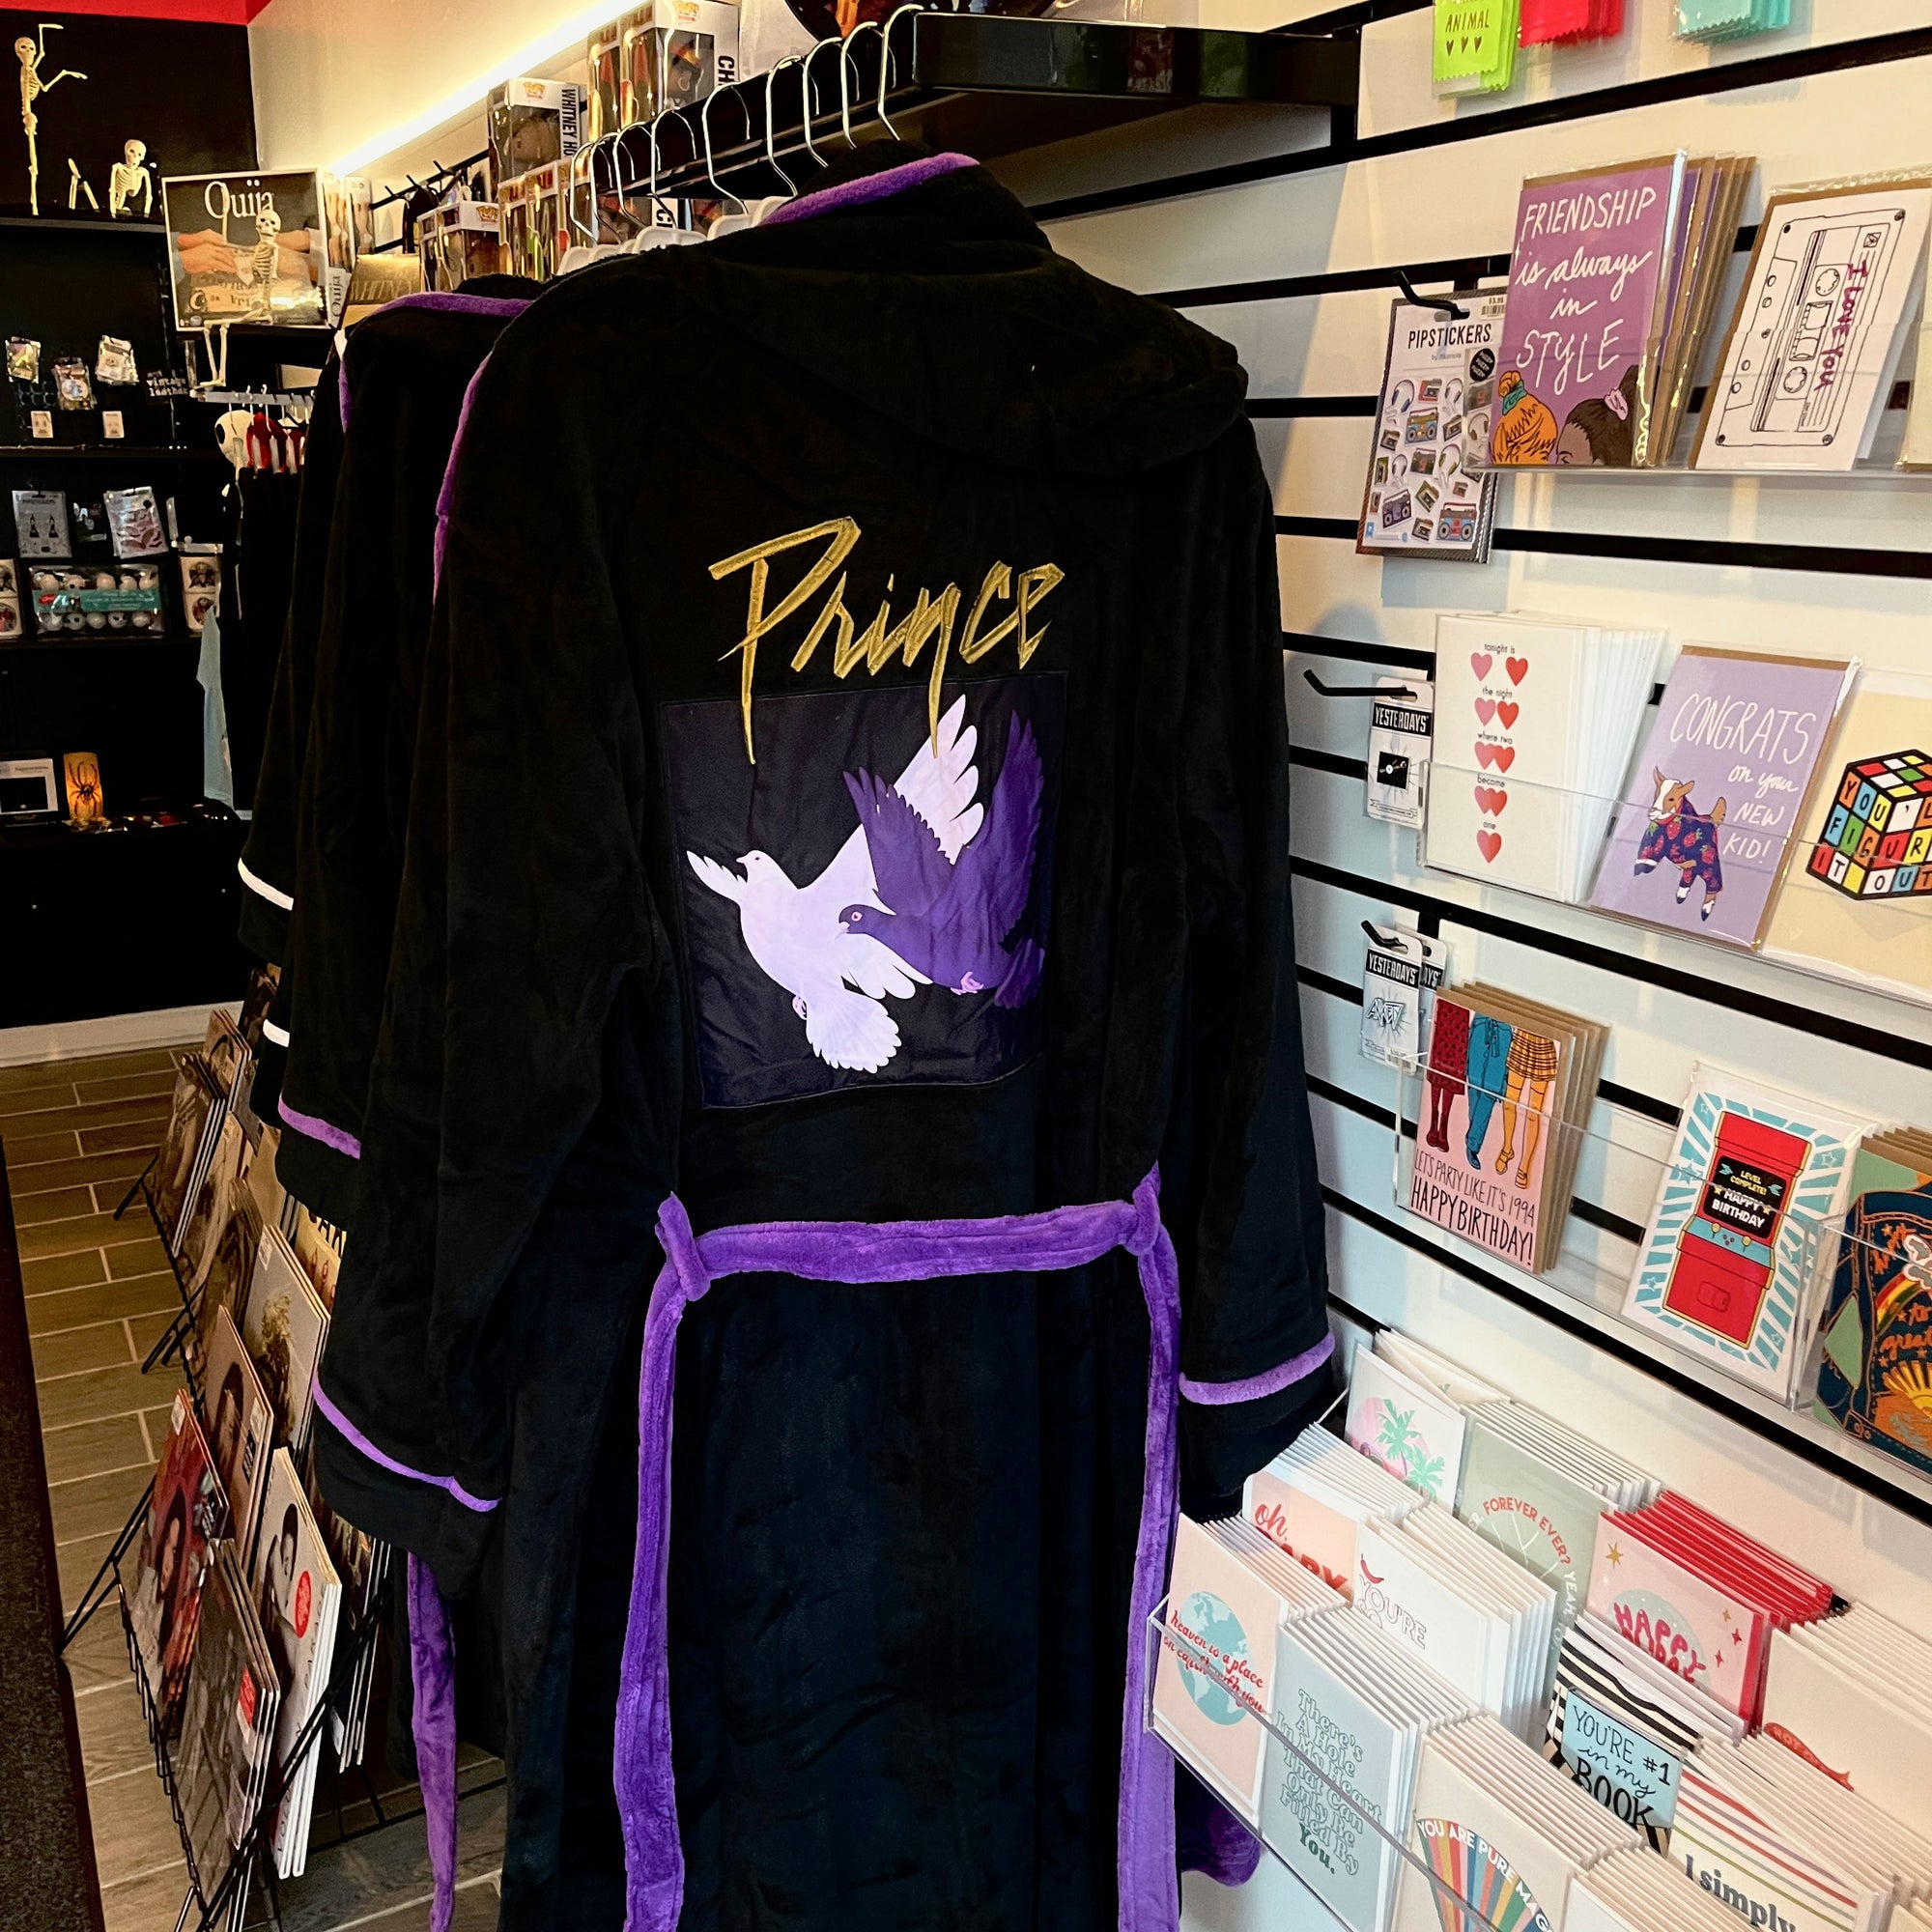 Prince "When Doves Cry" Black Robe